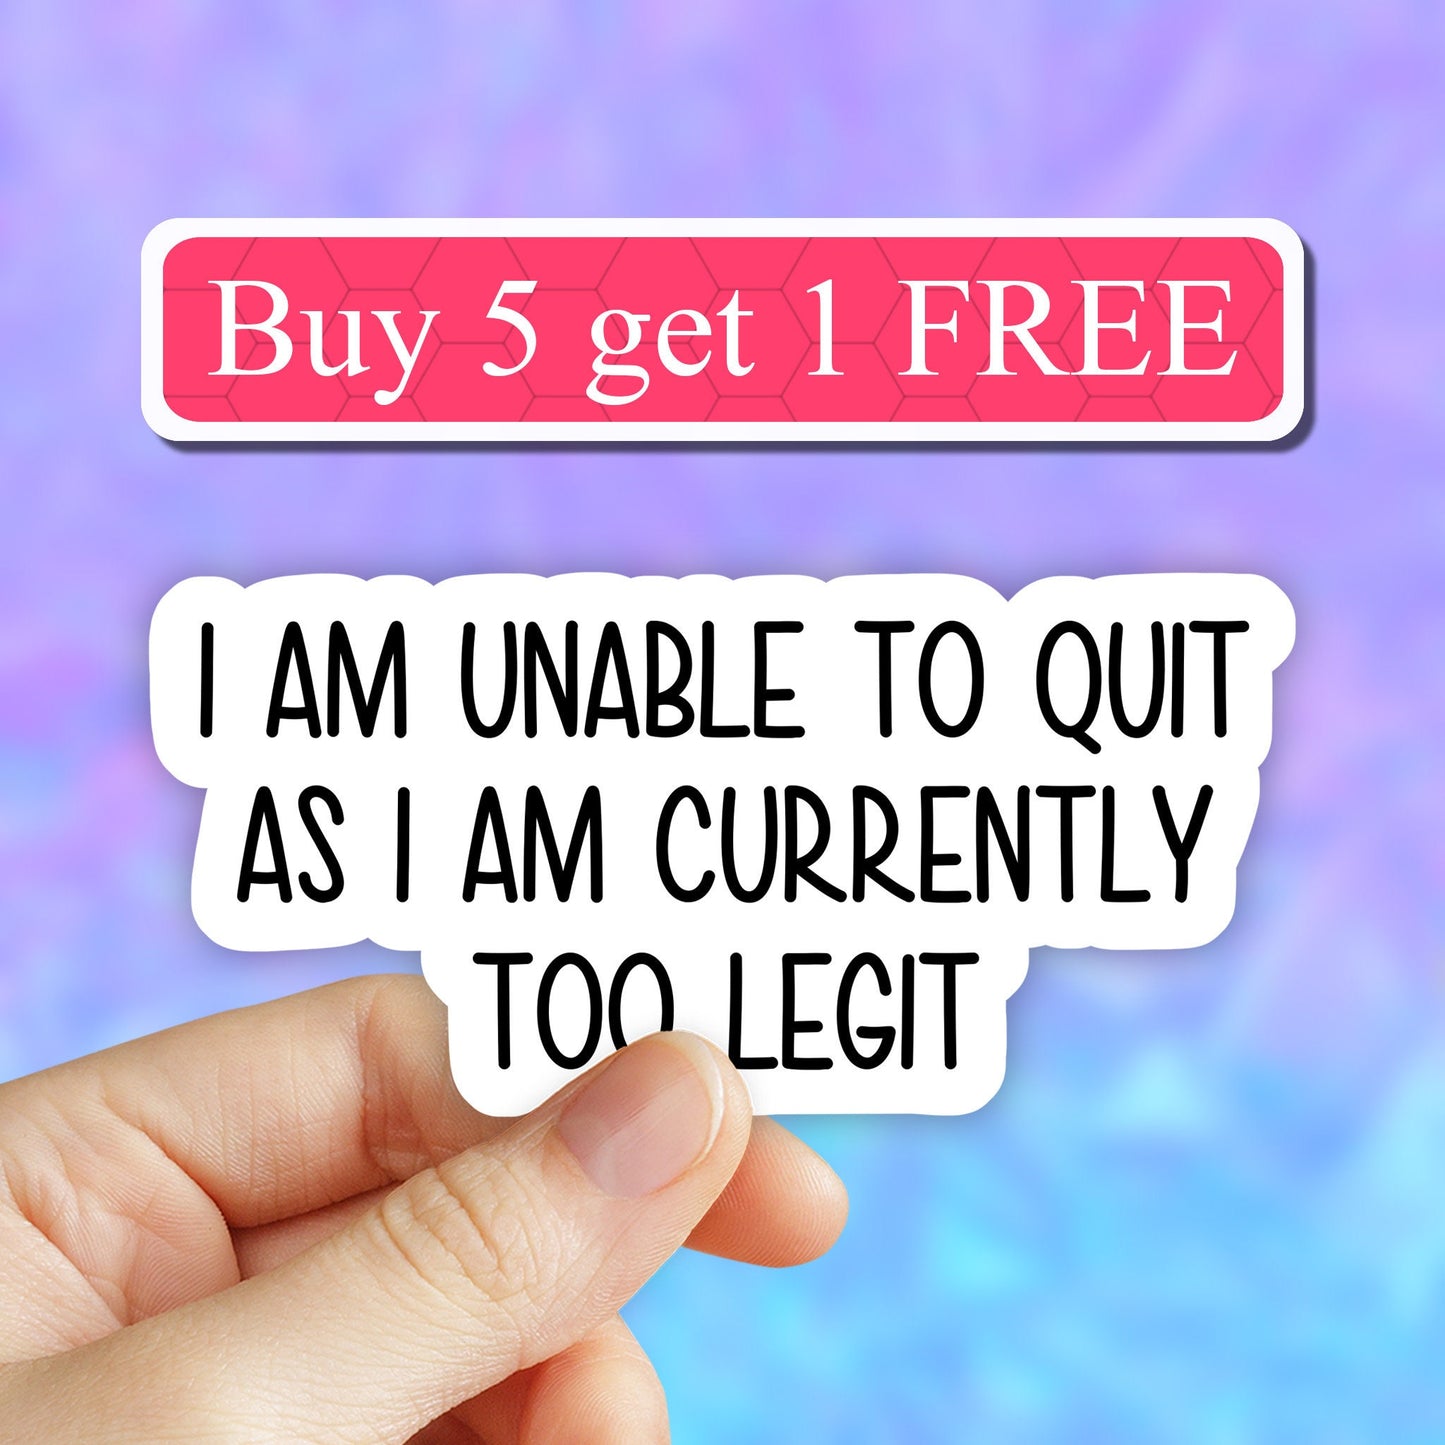 I am unable to quit as i am currently too legit sticker, motivate stickers, gym motivation sticker, laptop decal, courage stickers, computer